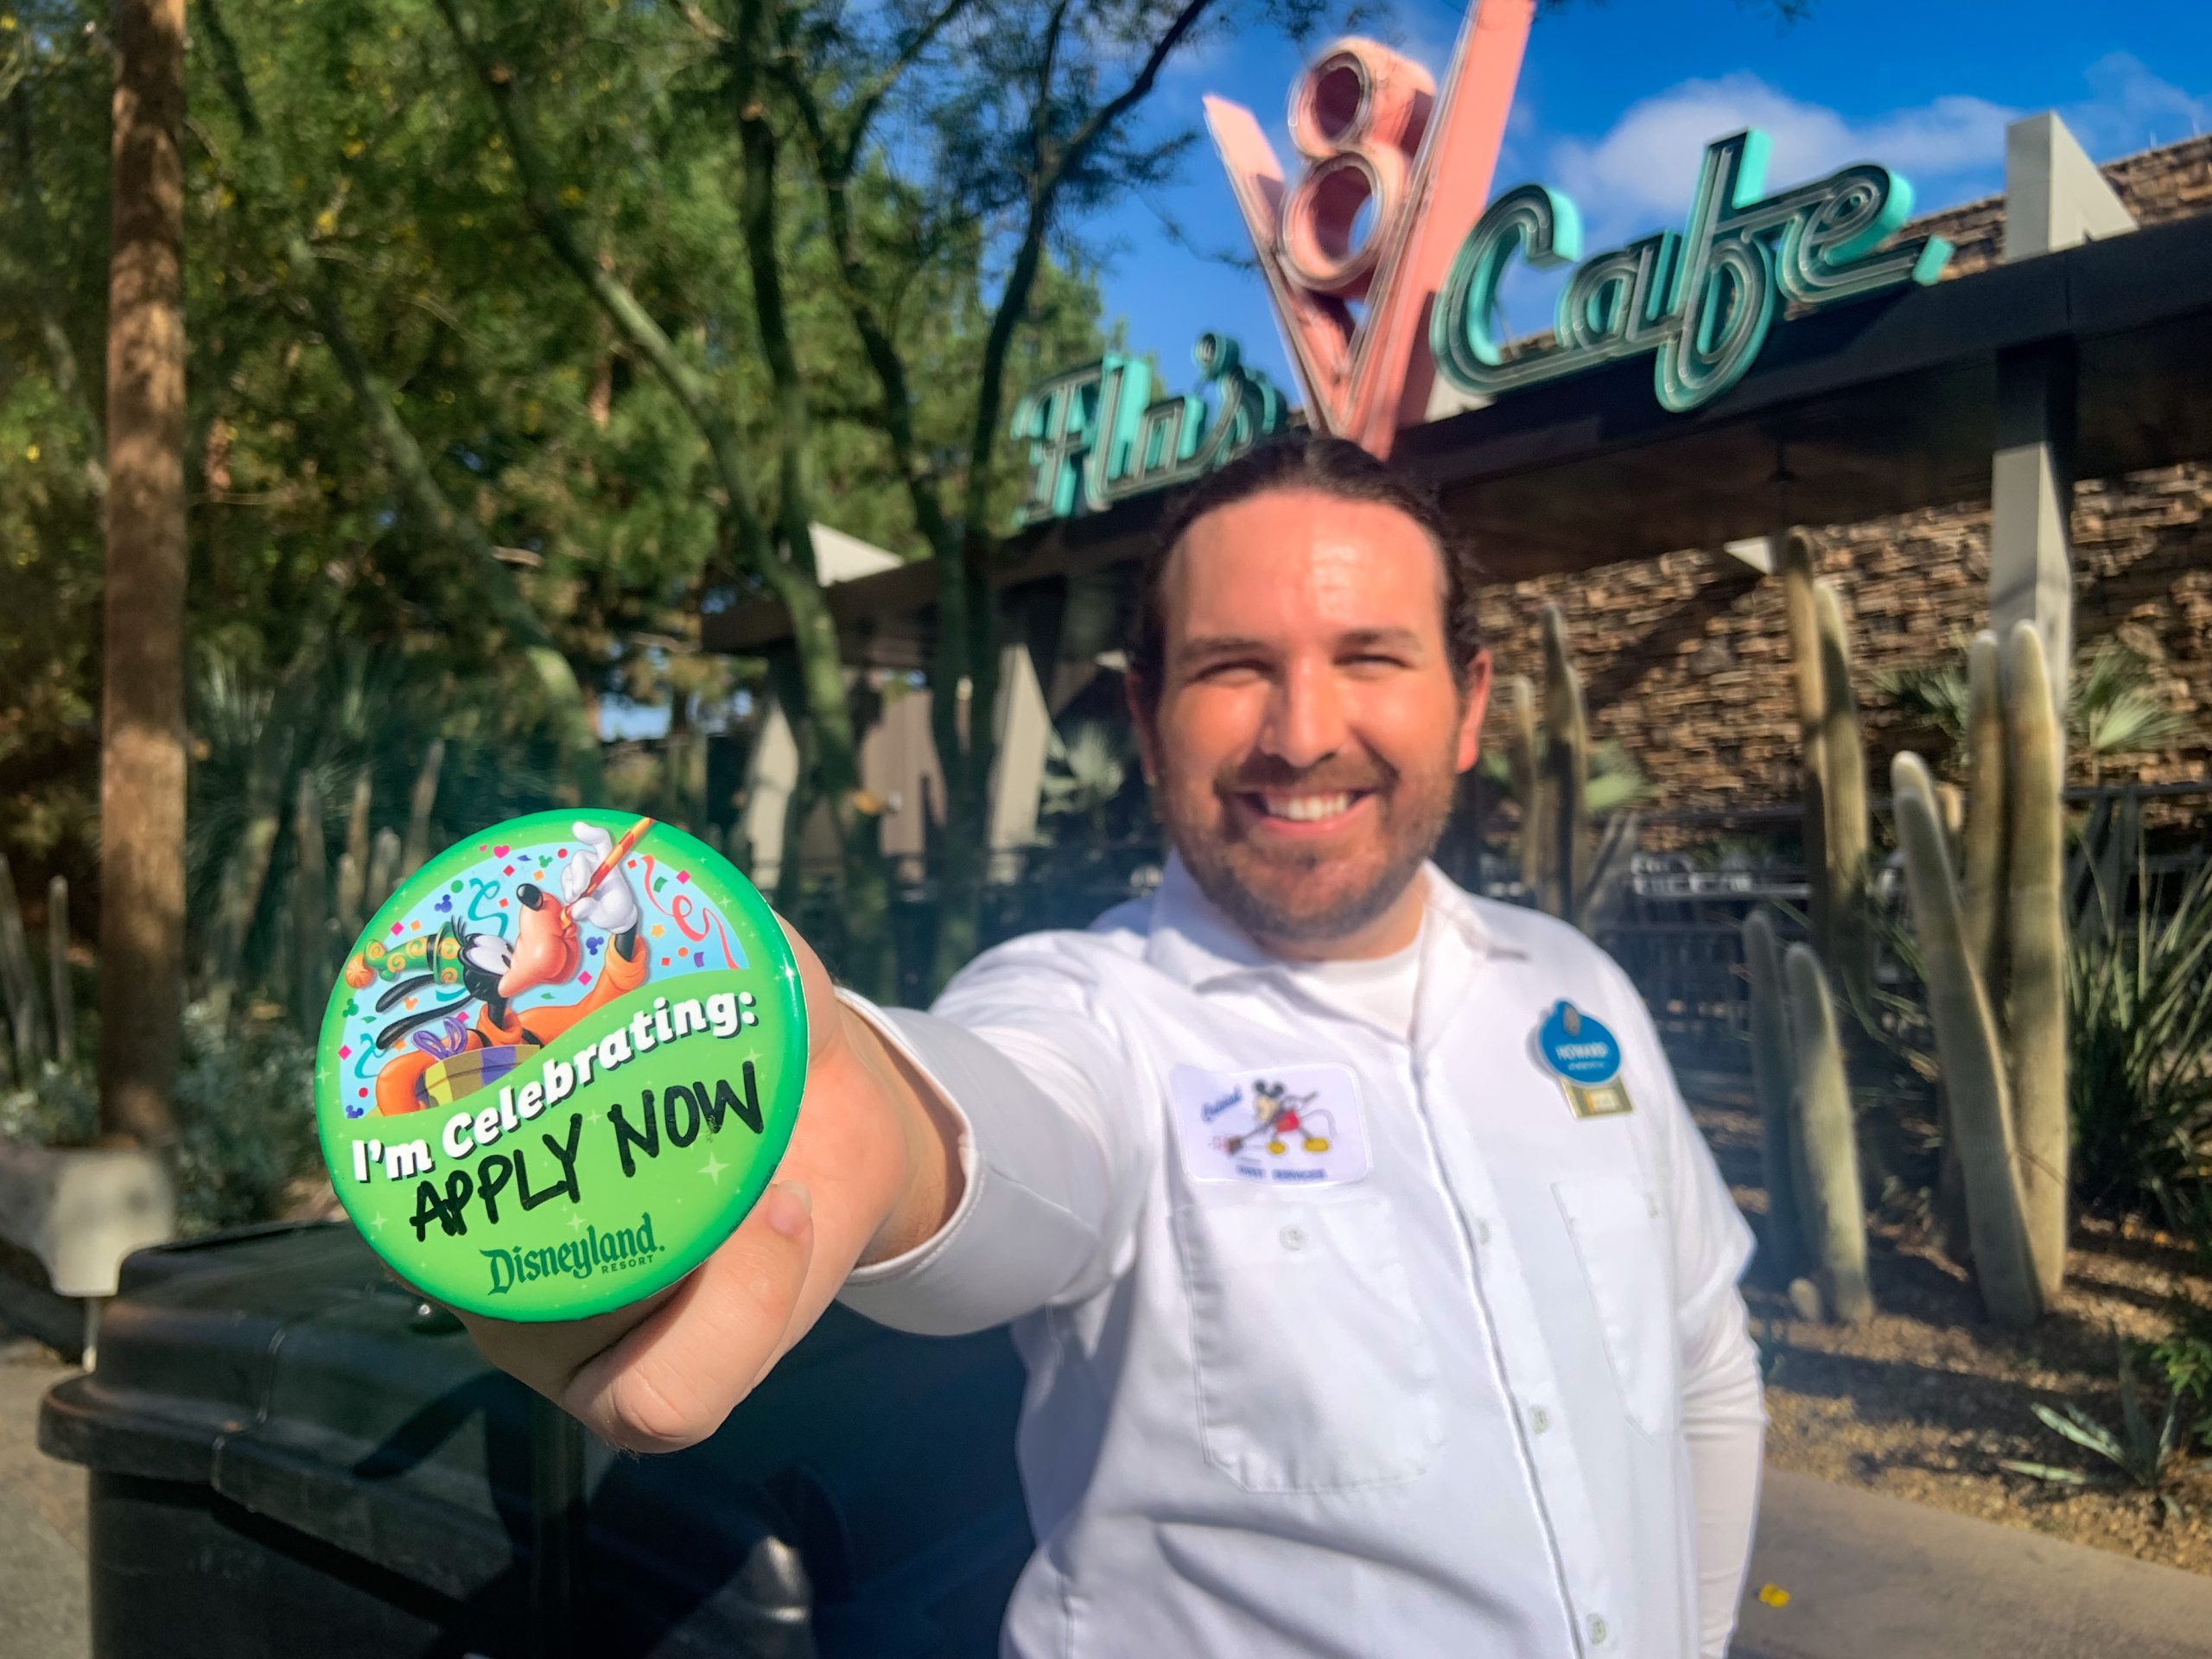 Disneyland Custodial Cast Member Holding Up An I'm Celebrating Button Saying "Apply Now"